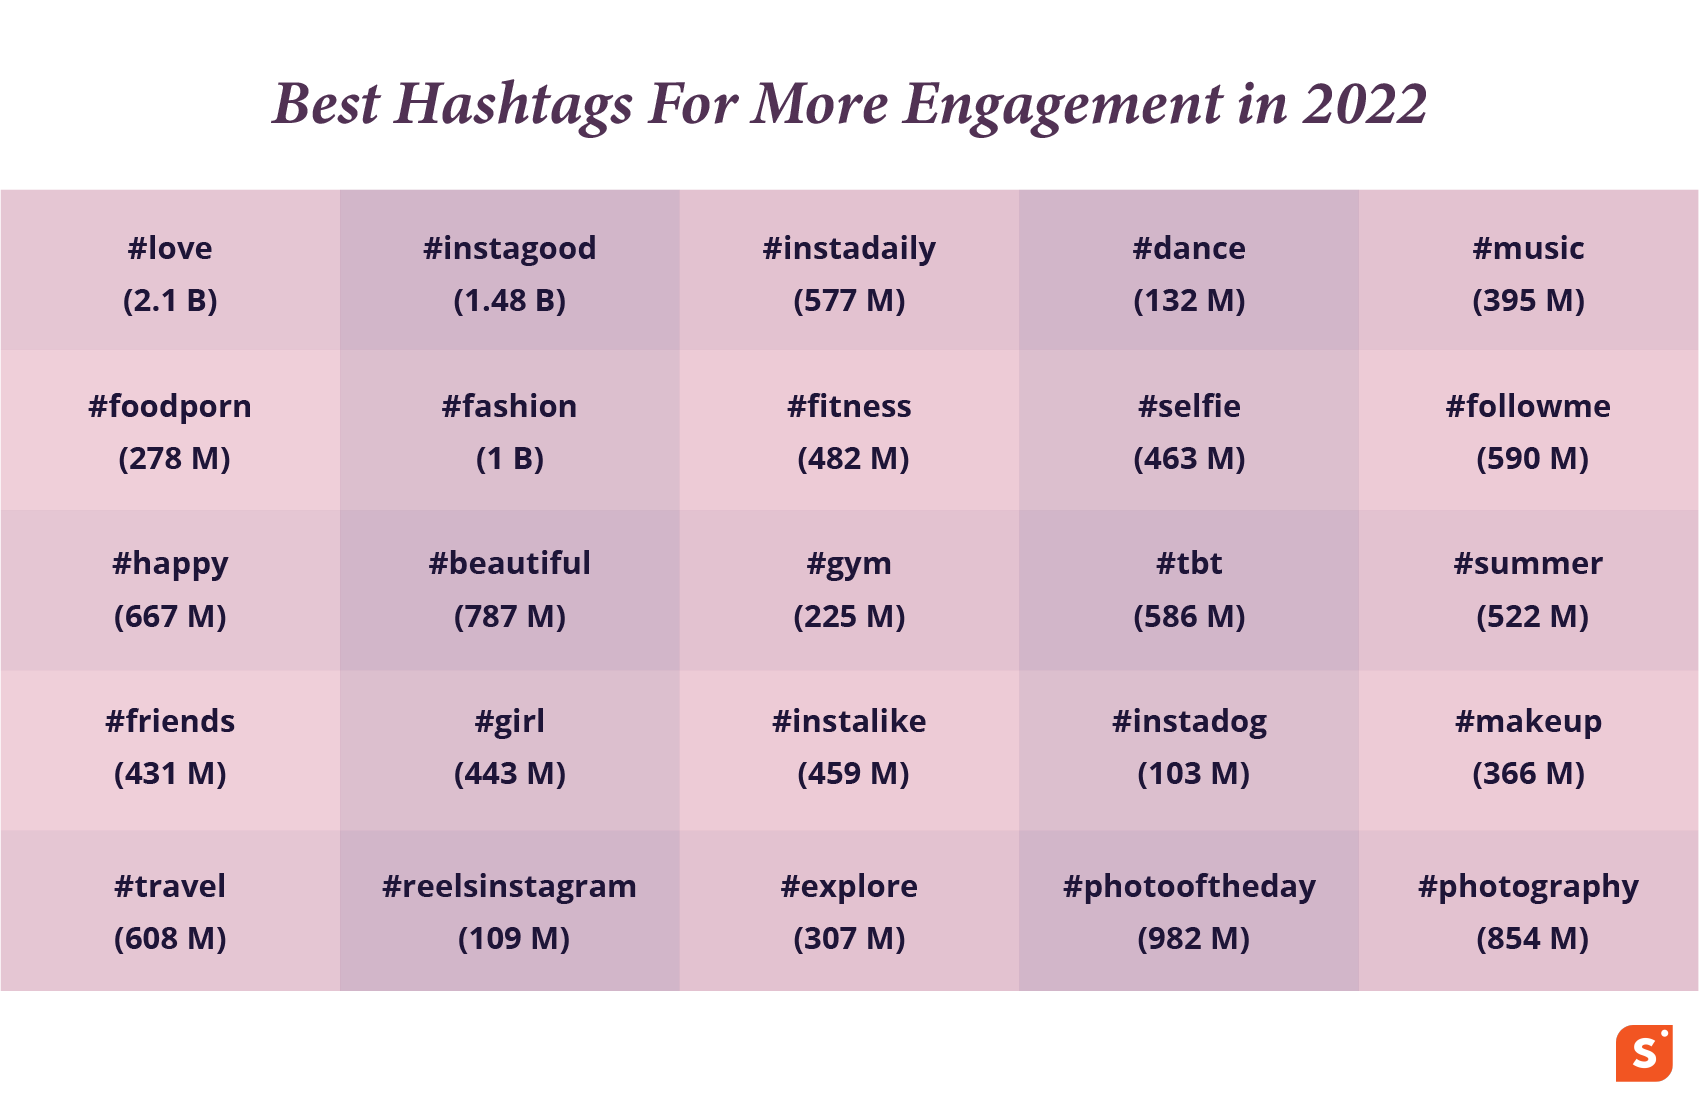 The Best Hashtags in 2022